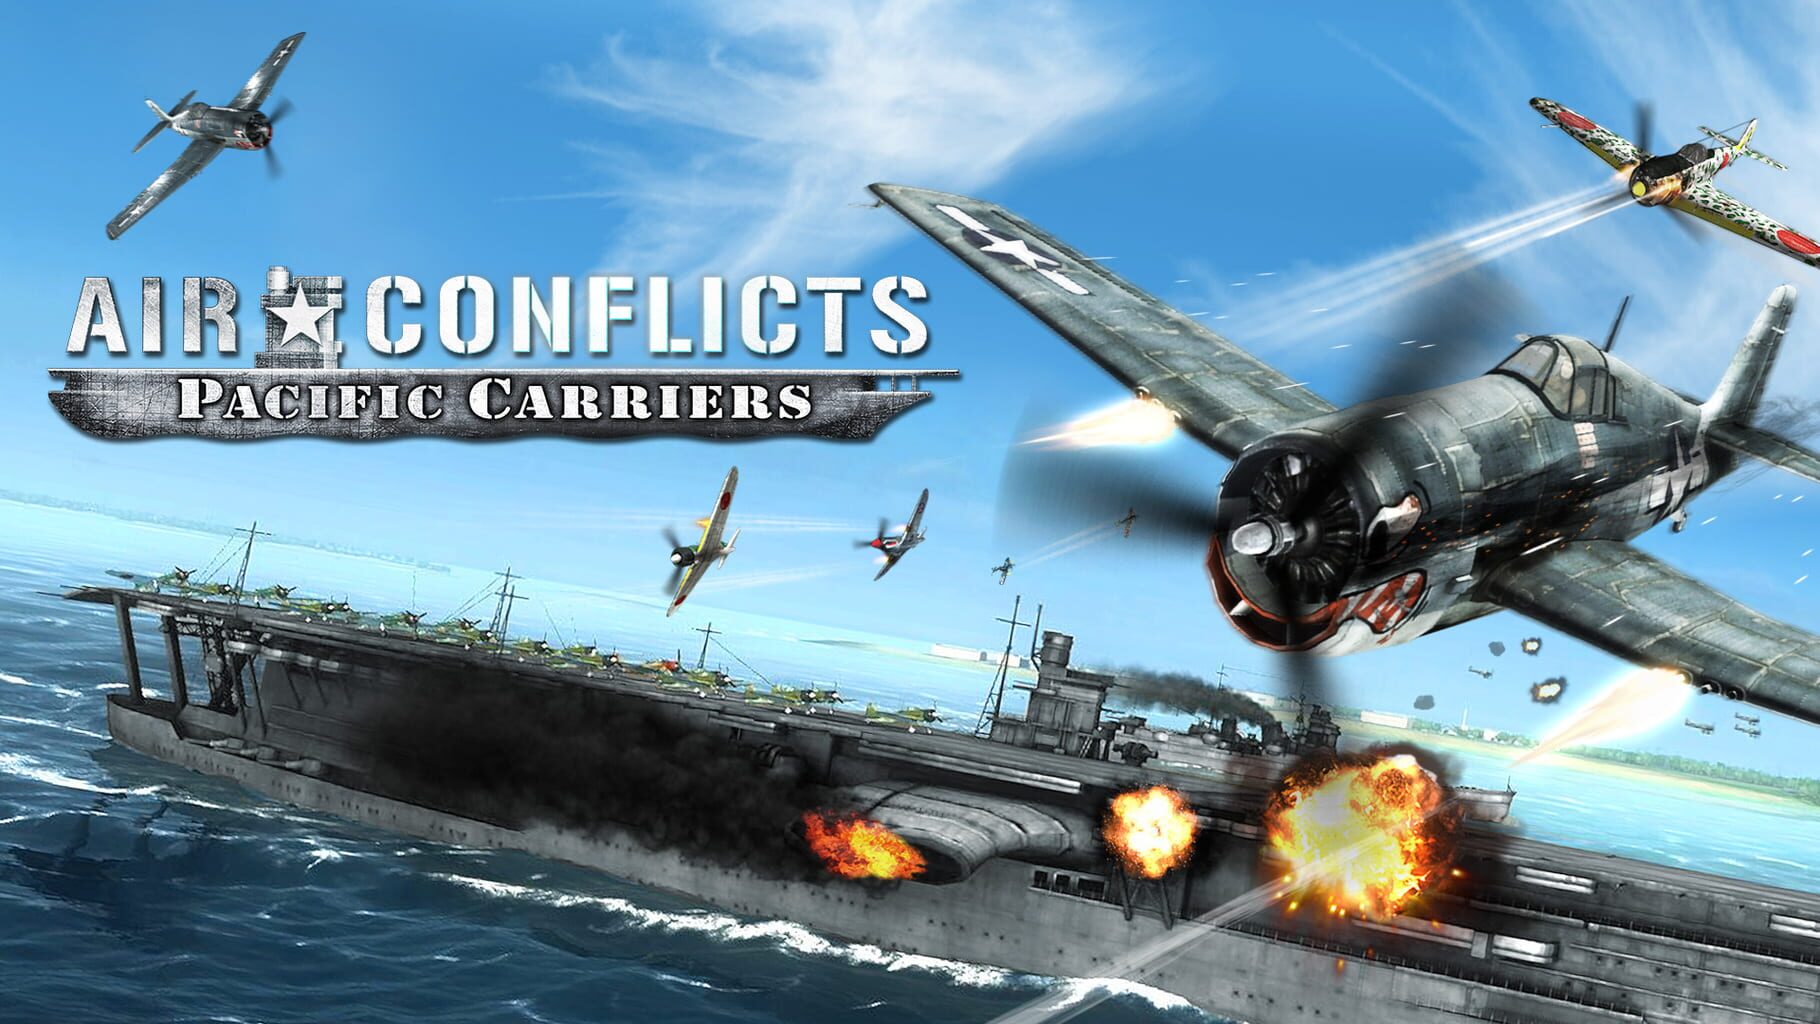 Air Conflicts: Pacific Carriers artwork